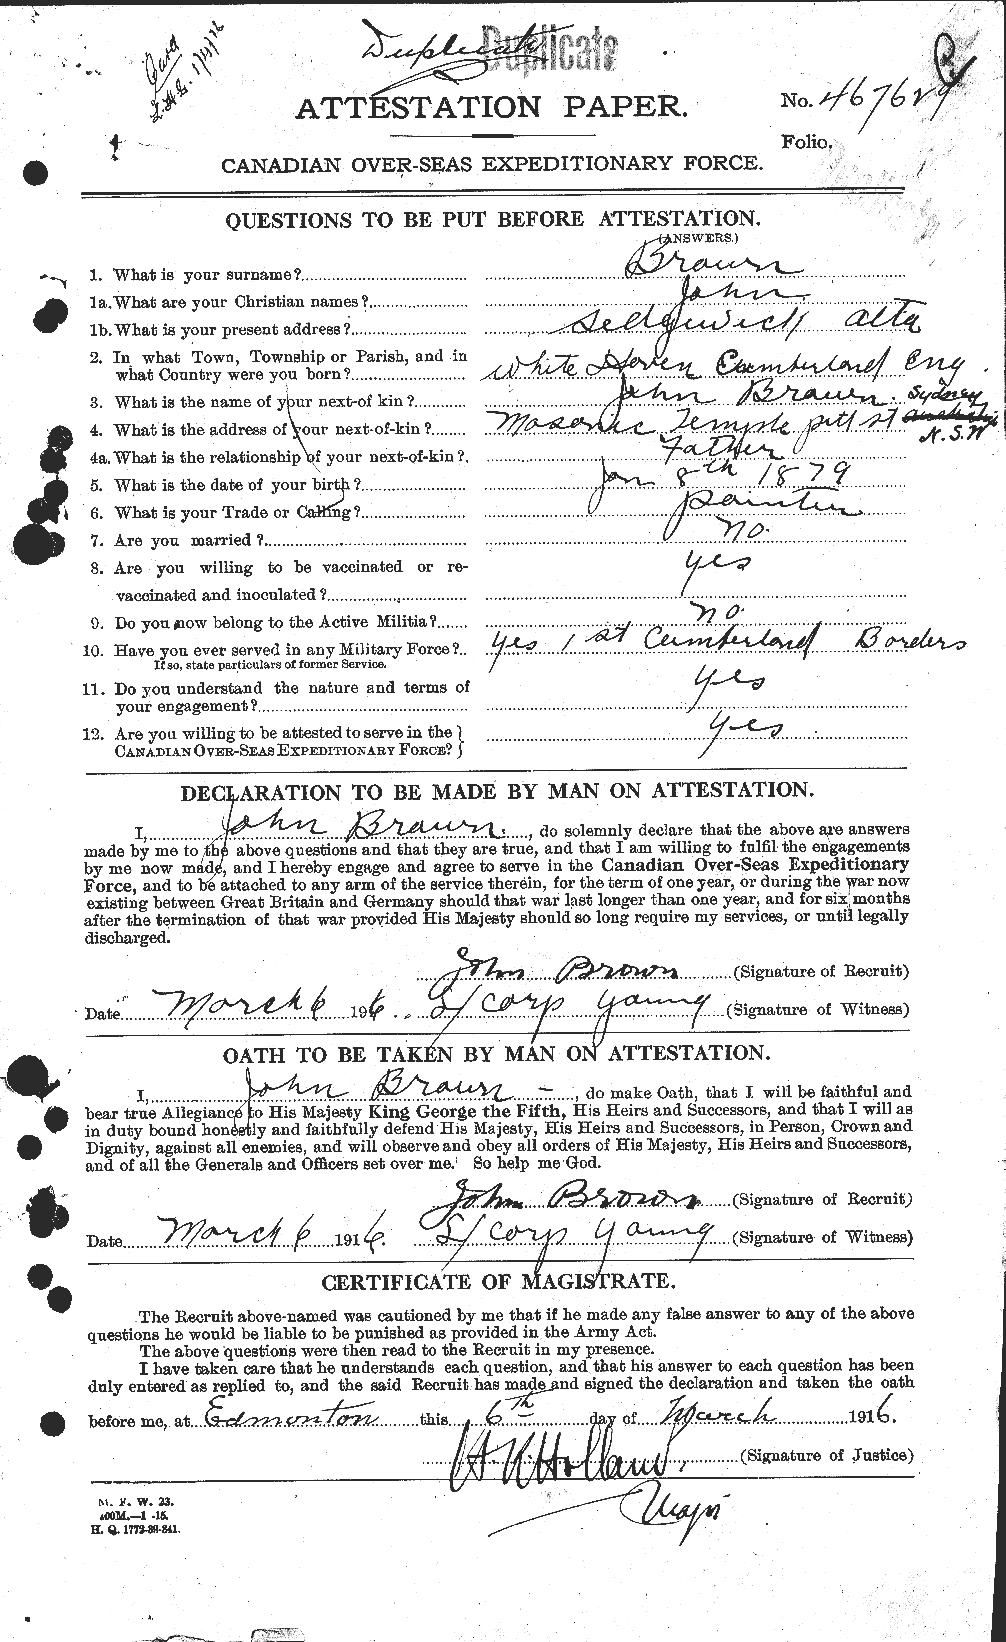 Personnel Records of the First World War - CEF 263897a